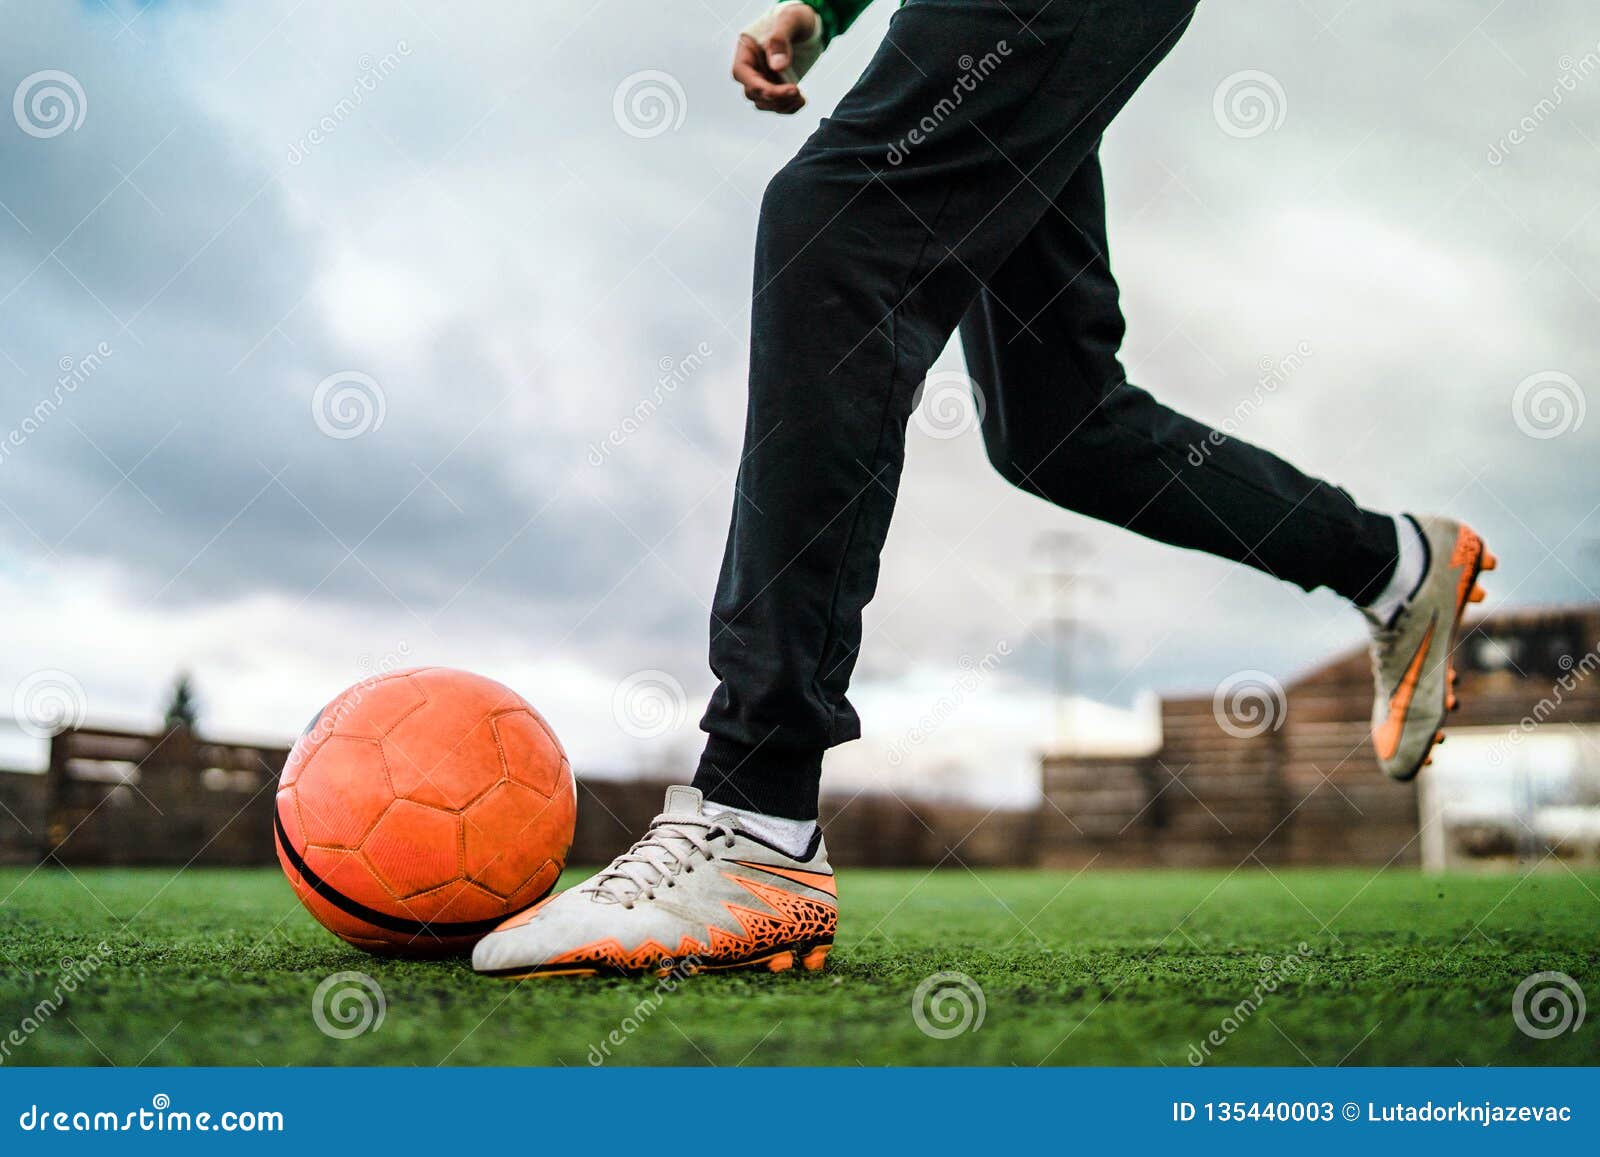 Close Up On Foot Kicking The Soccer Ball Stock Image Image Of Foot